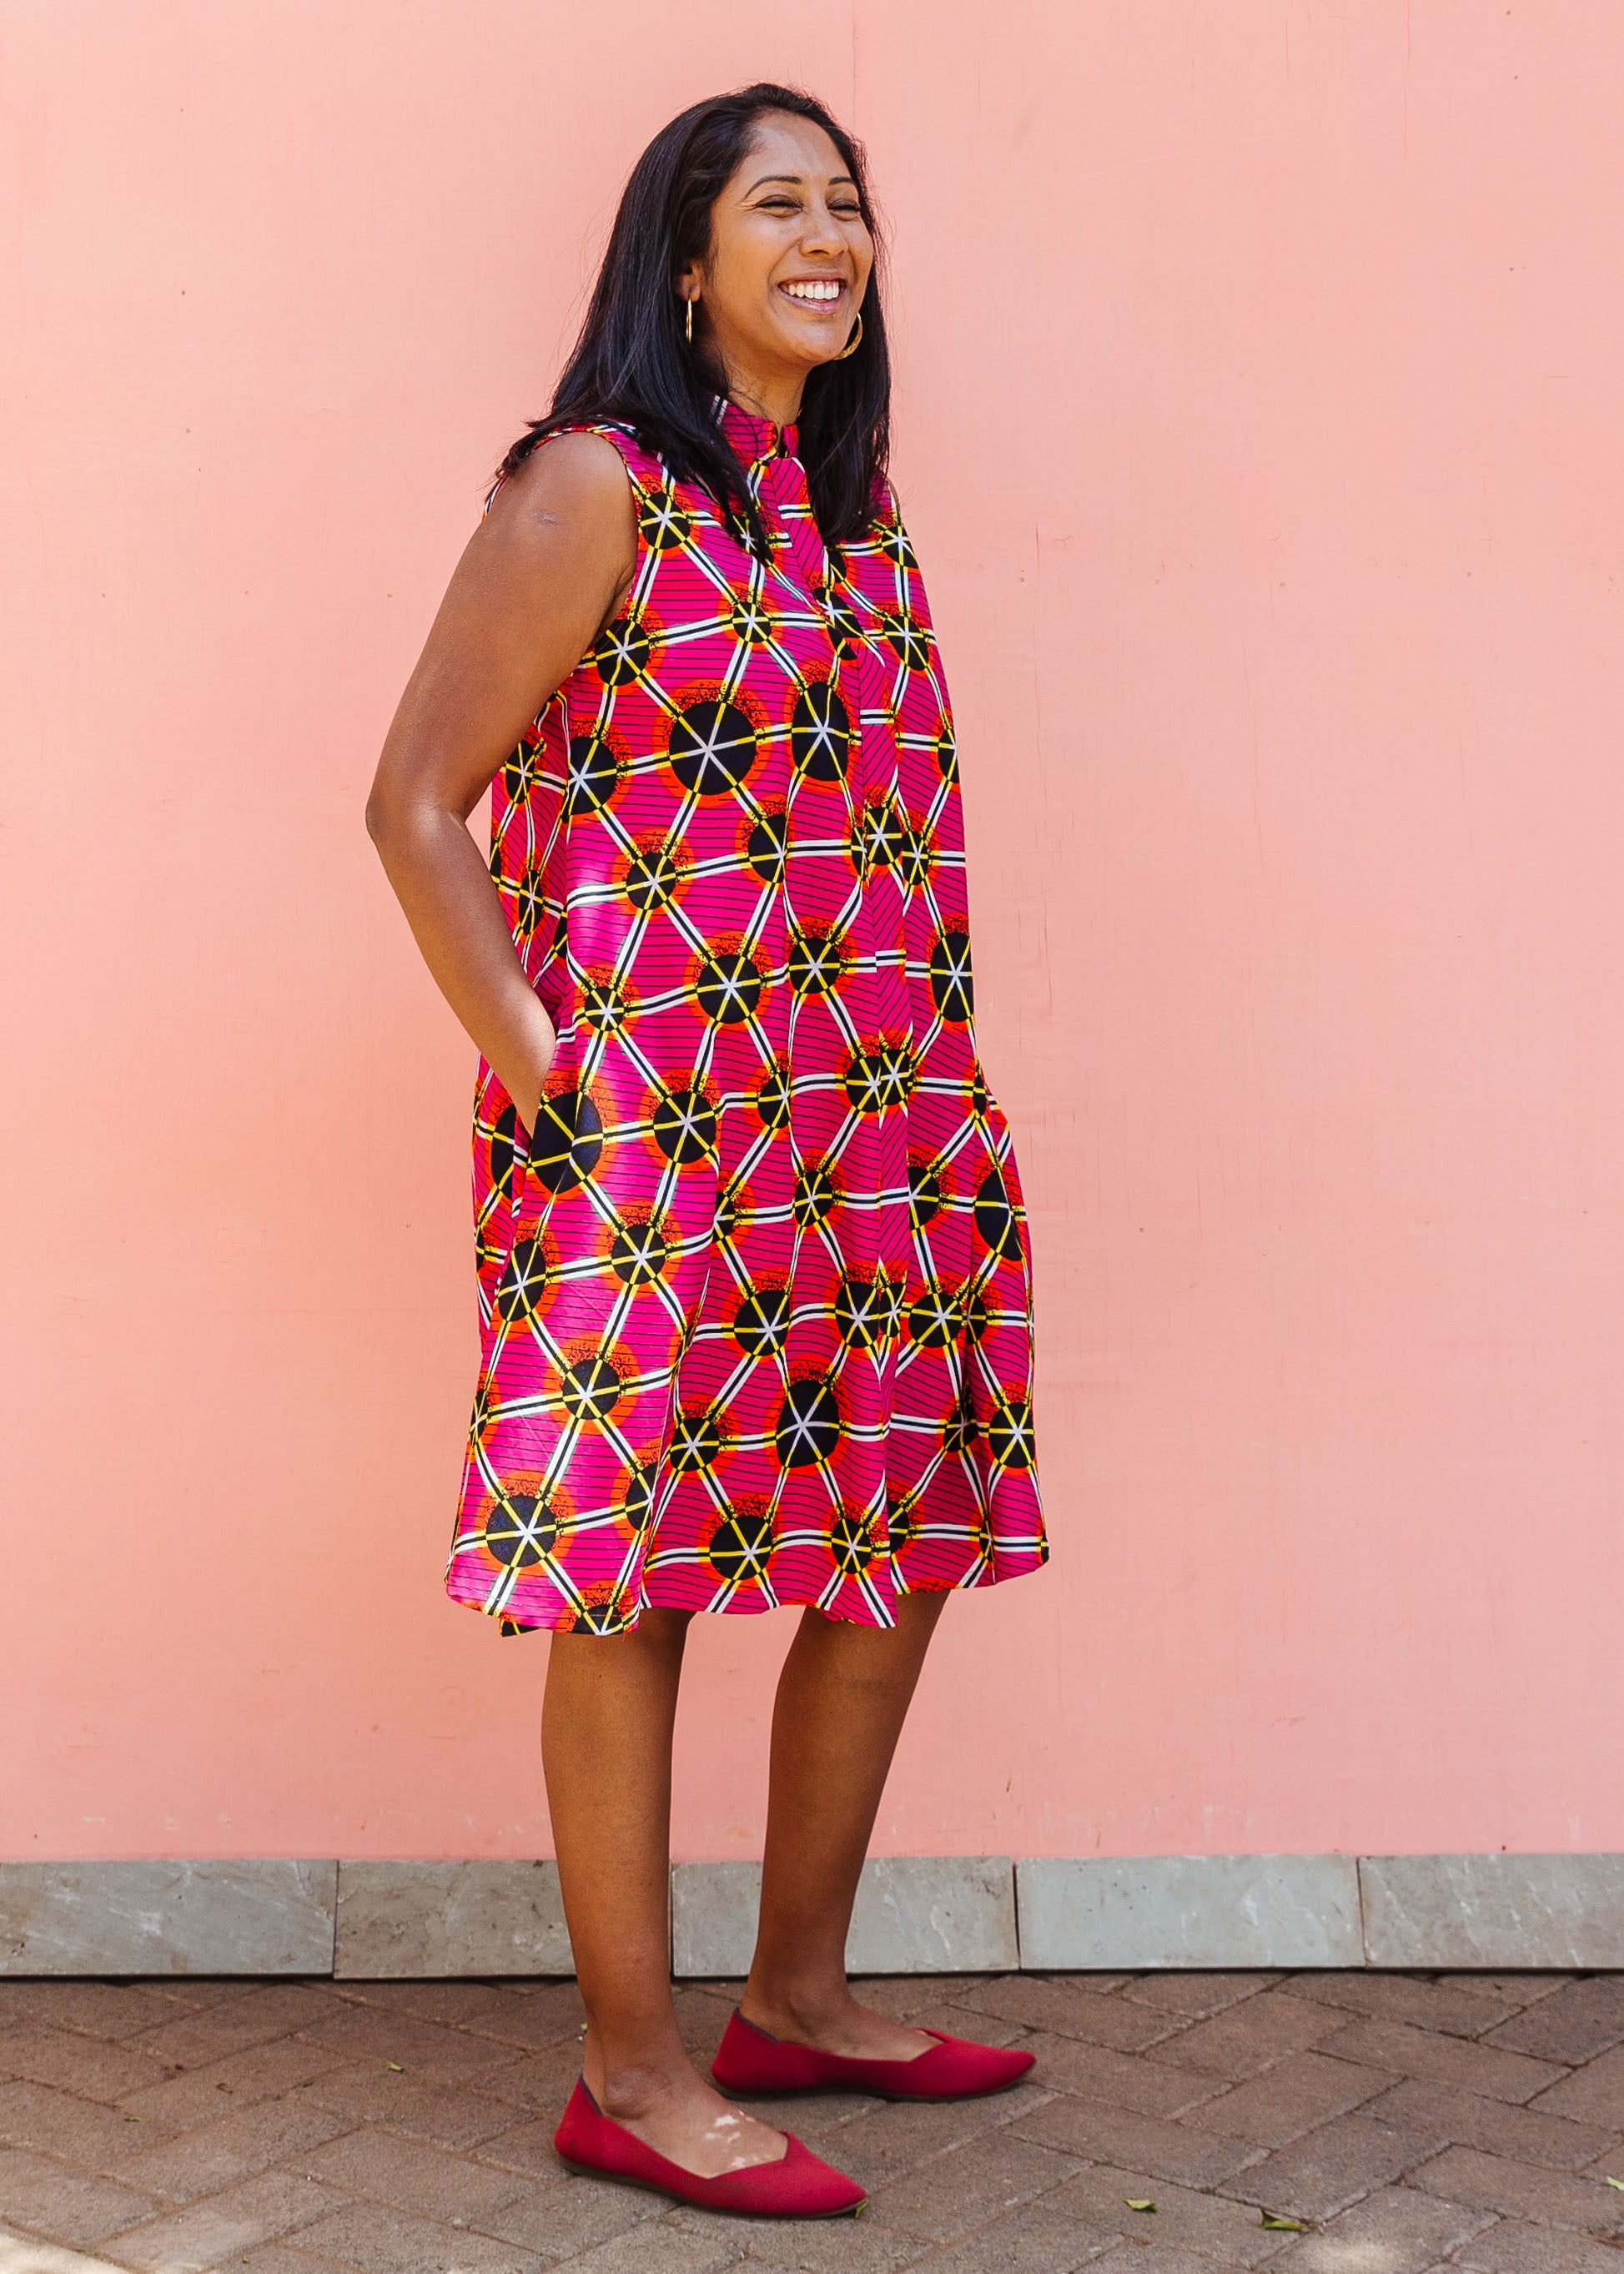 Model wearing sleeveless fuchsia dress with black dots and white and yellow lines.